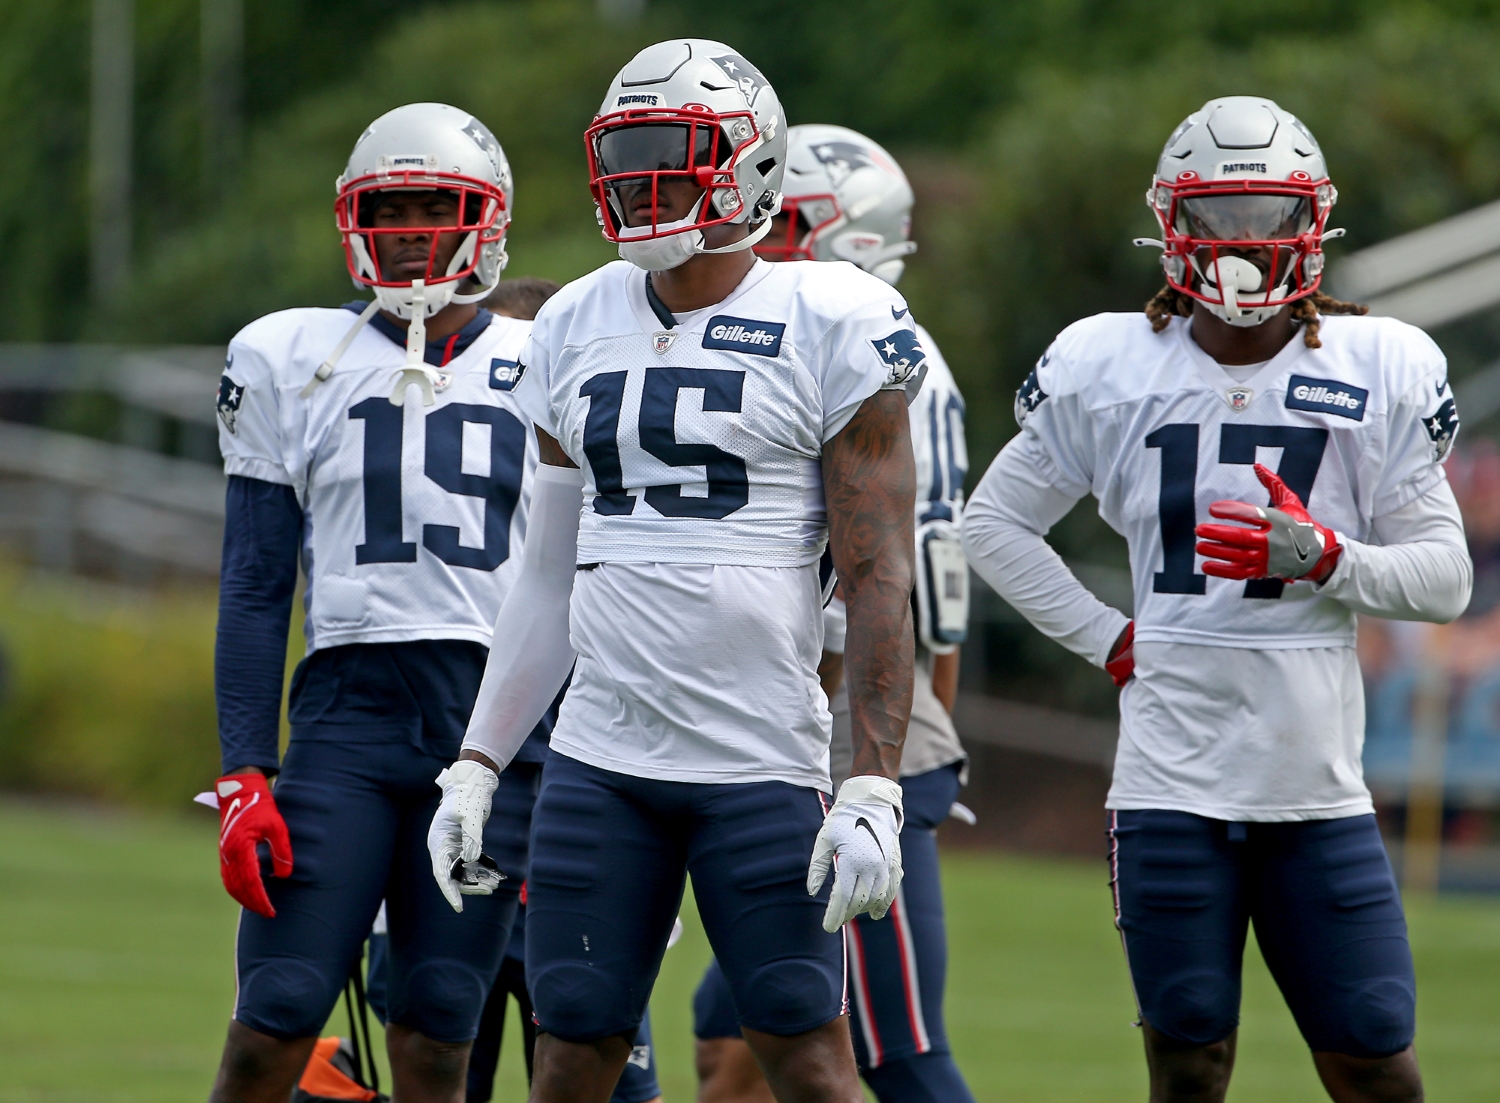 New England Patriots receivers Isaiah Zuber (19), N'Keal Harry (15), and Kristian Wilkerson (17) stand together during training camp practice.